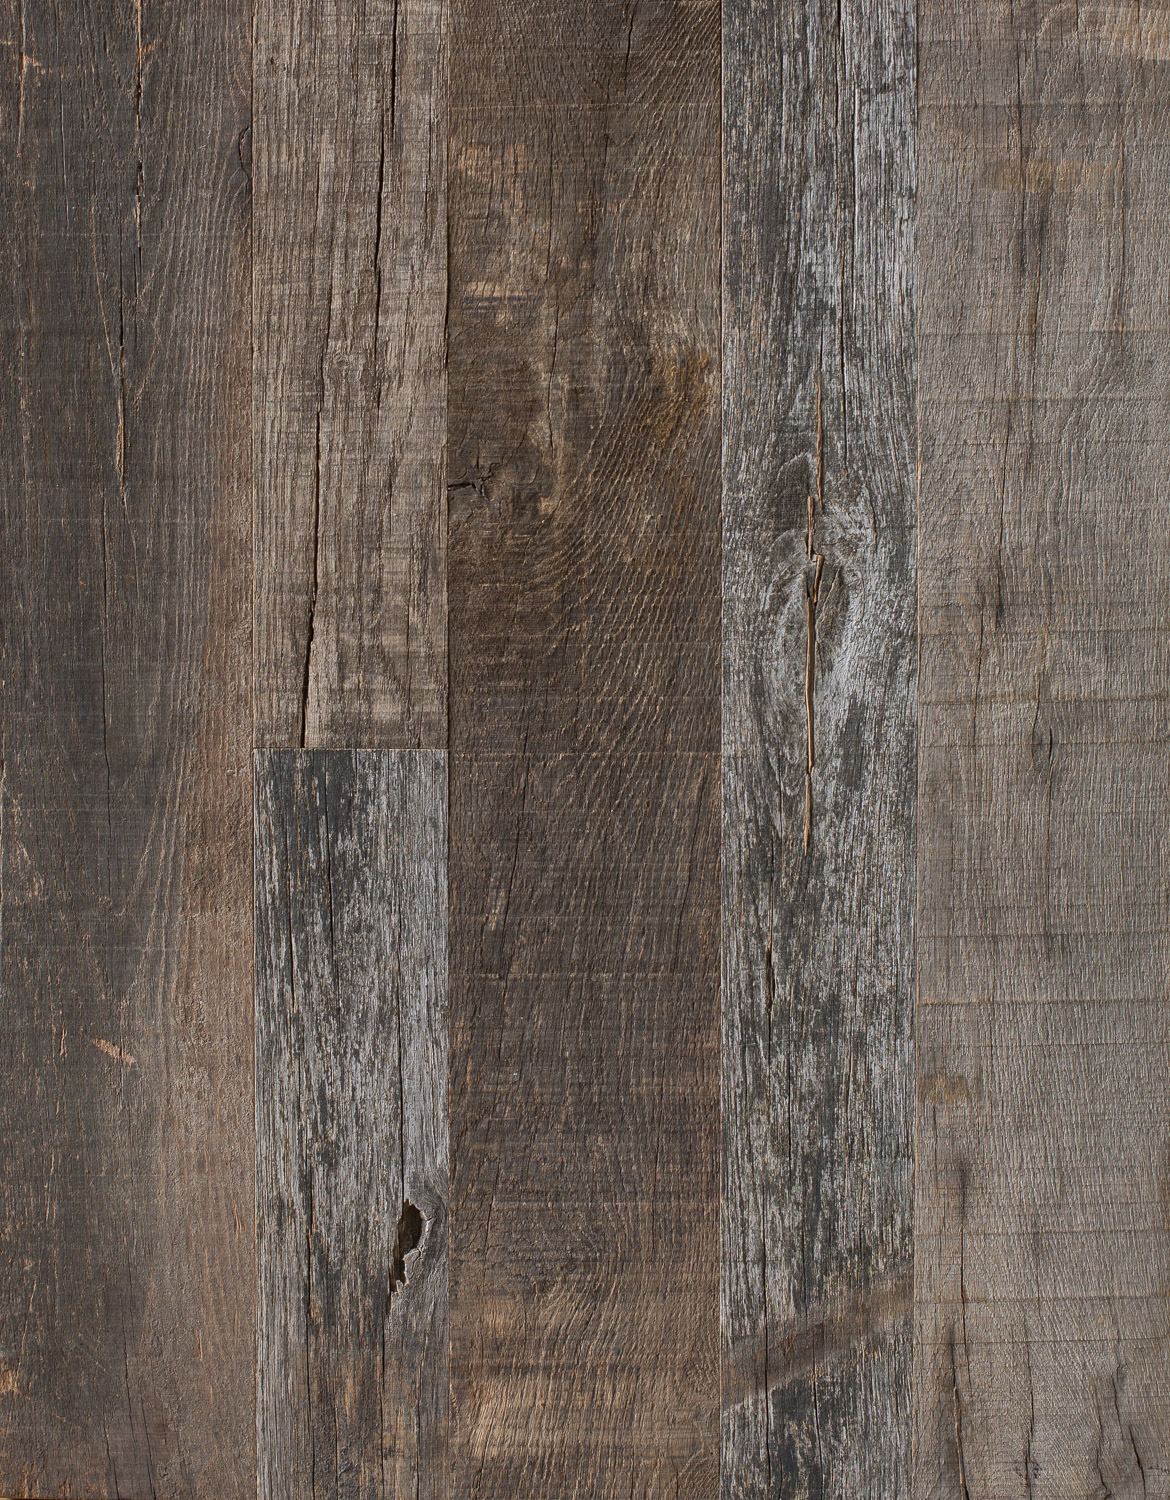 How Often To Oil Wood Flooring (2022 updated)